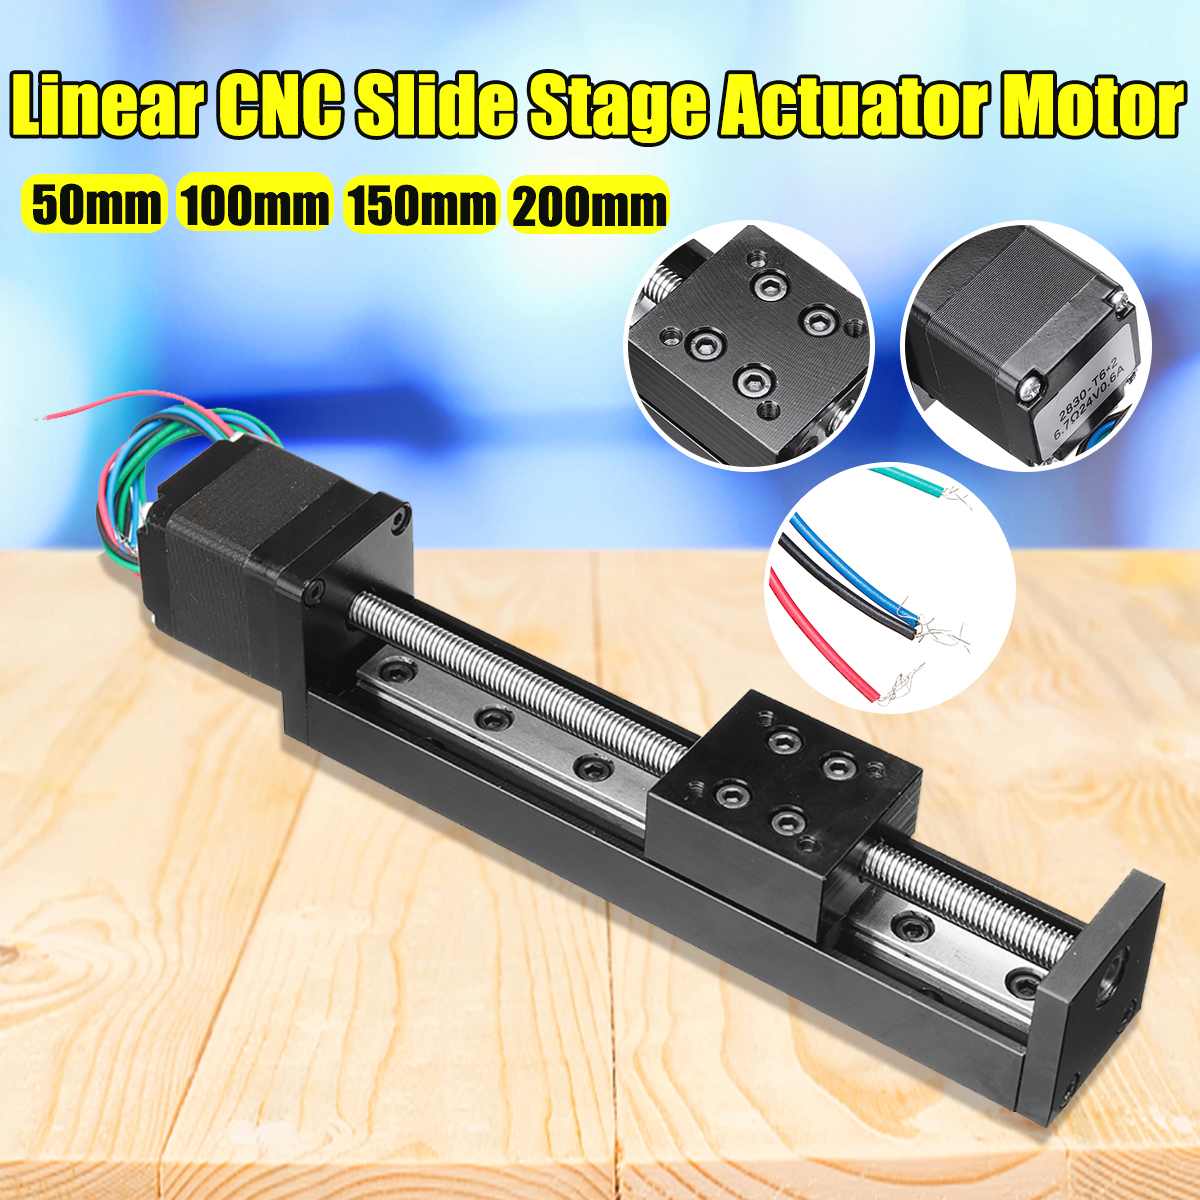 Z Axis Slide Linear Motion 50-200mm Travel with Nema11 Stepper Motor CNC Mills 